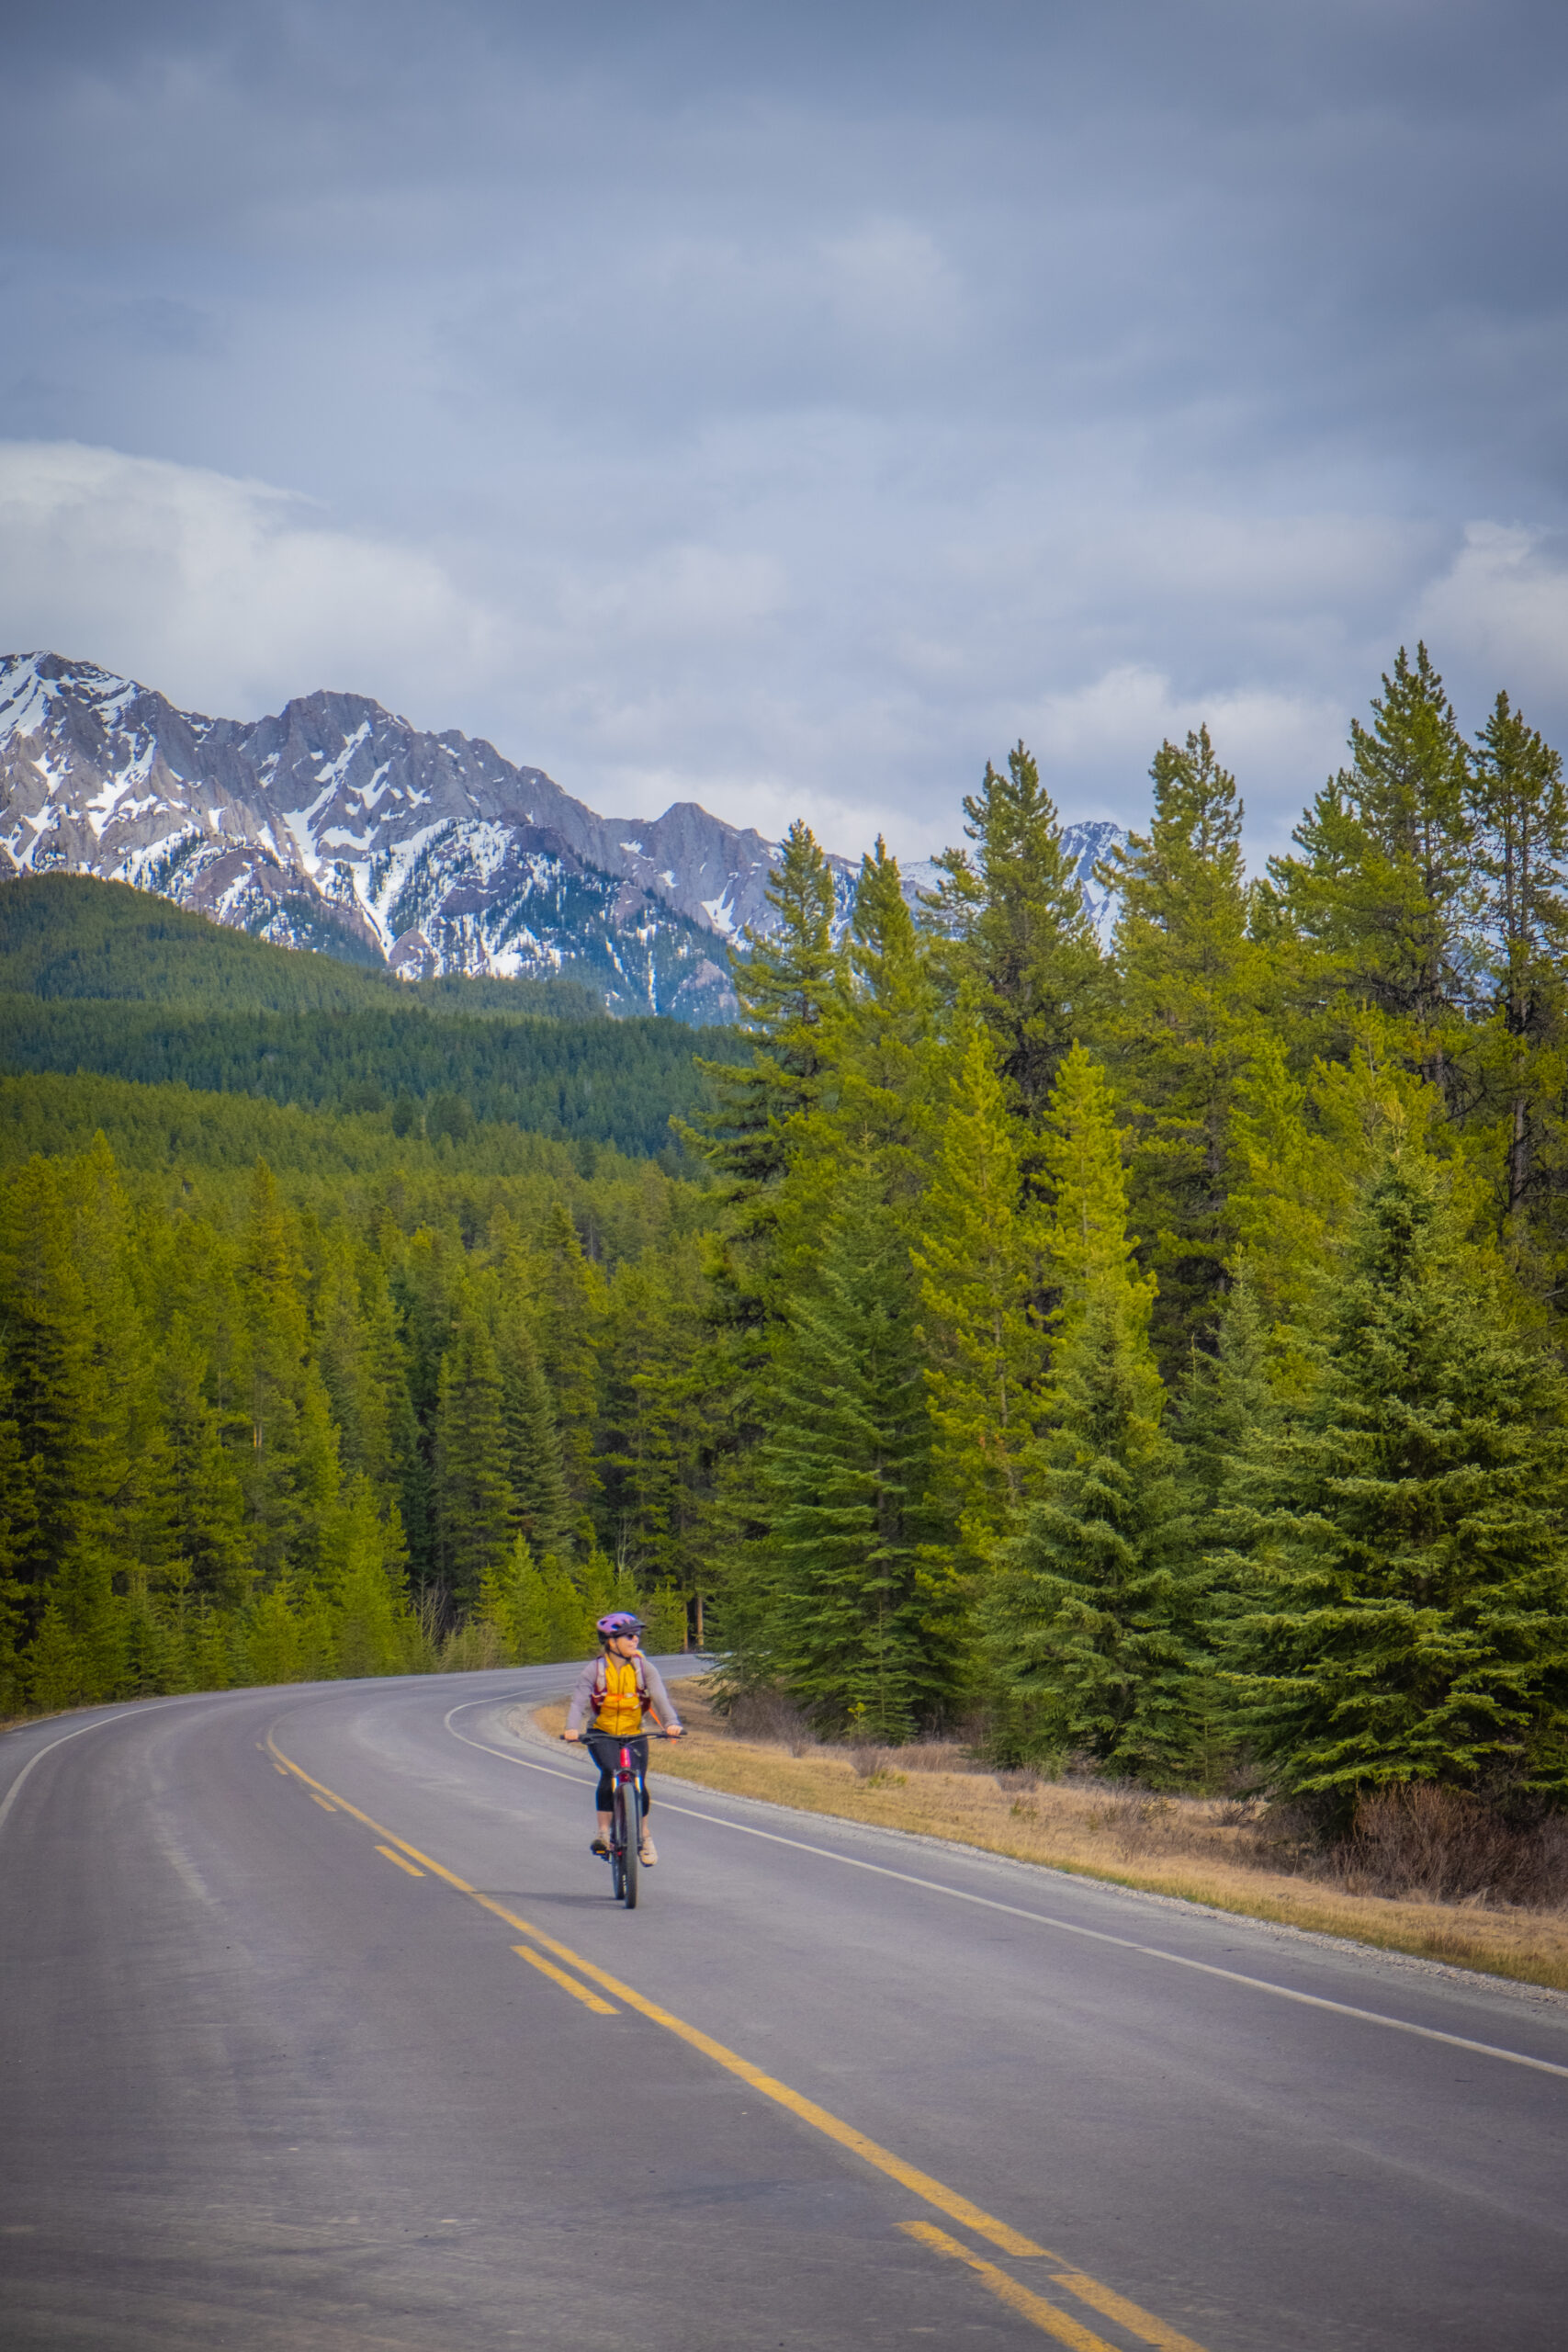 Biking the Bow Valley Parkway in June